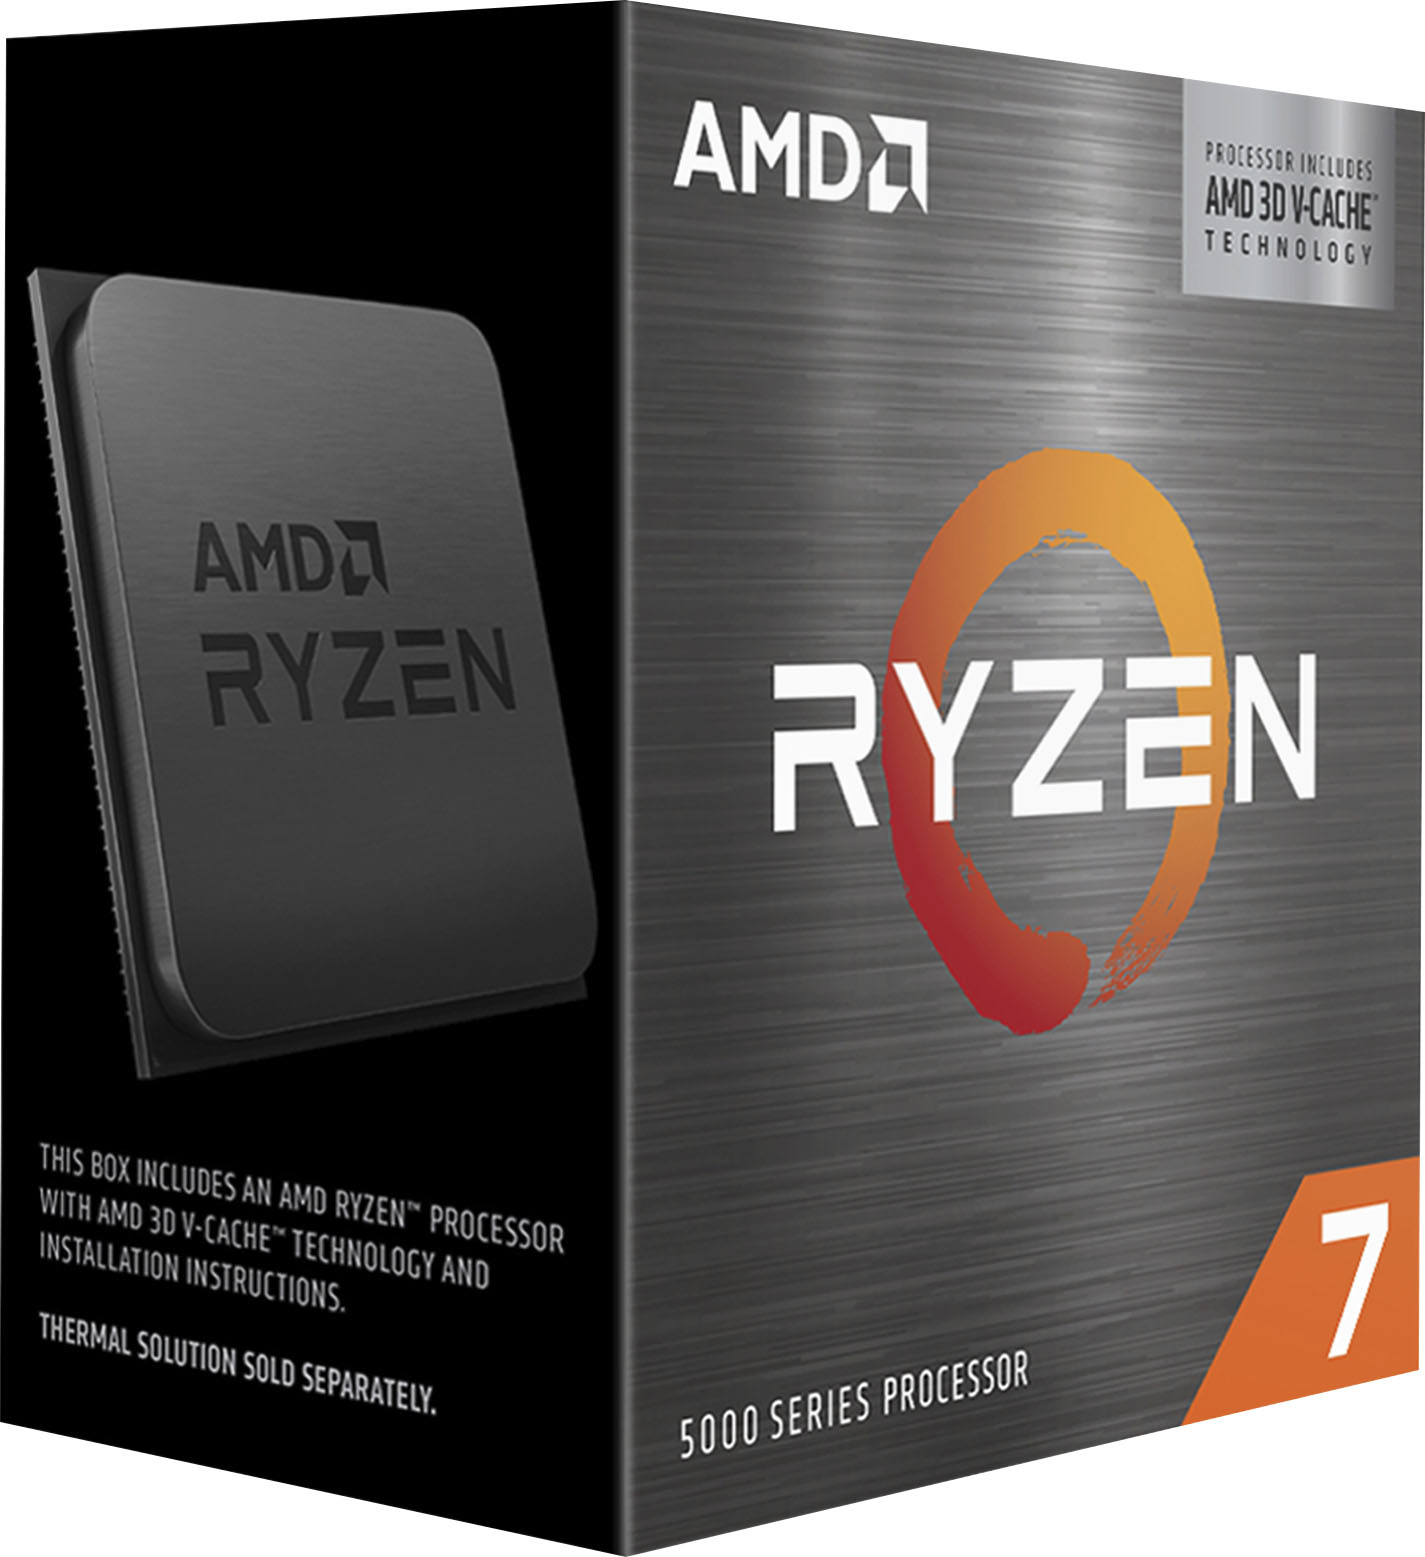 AMD Ryzen 7 5800X Desktop Processors 3.8GHz CPU Up to 4.7GHz 32MB AMD For  Gaming